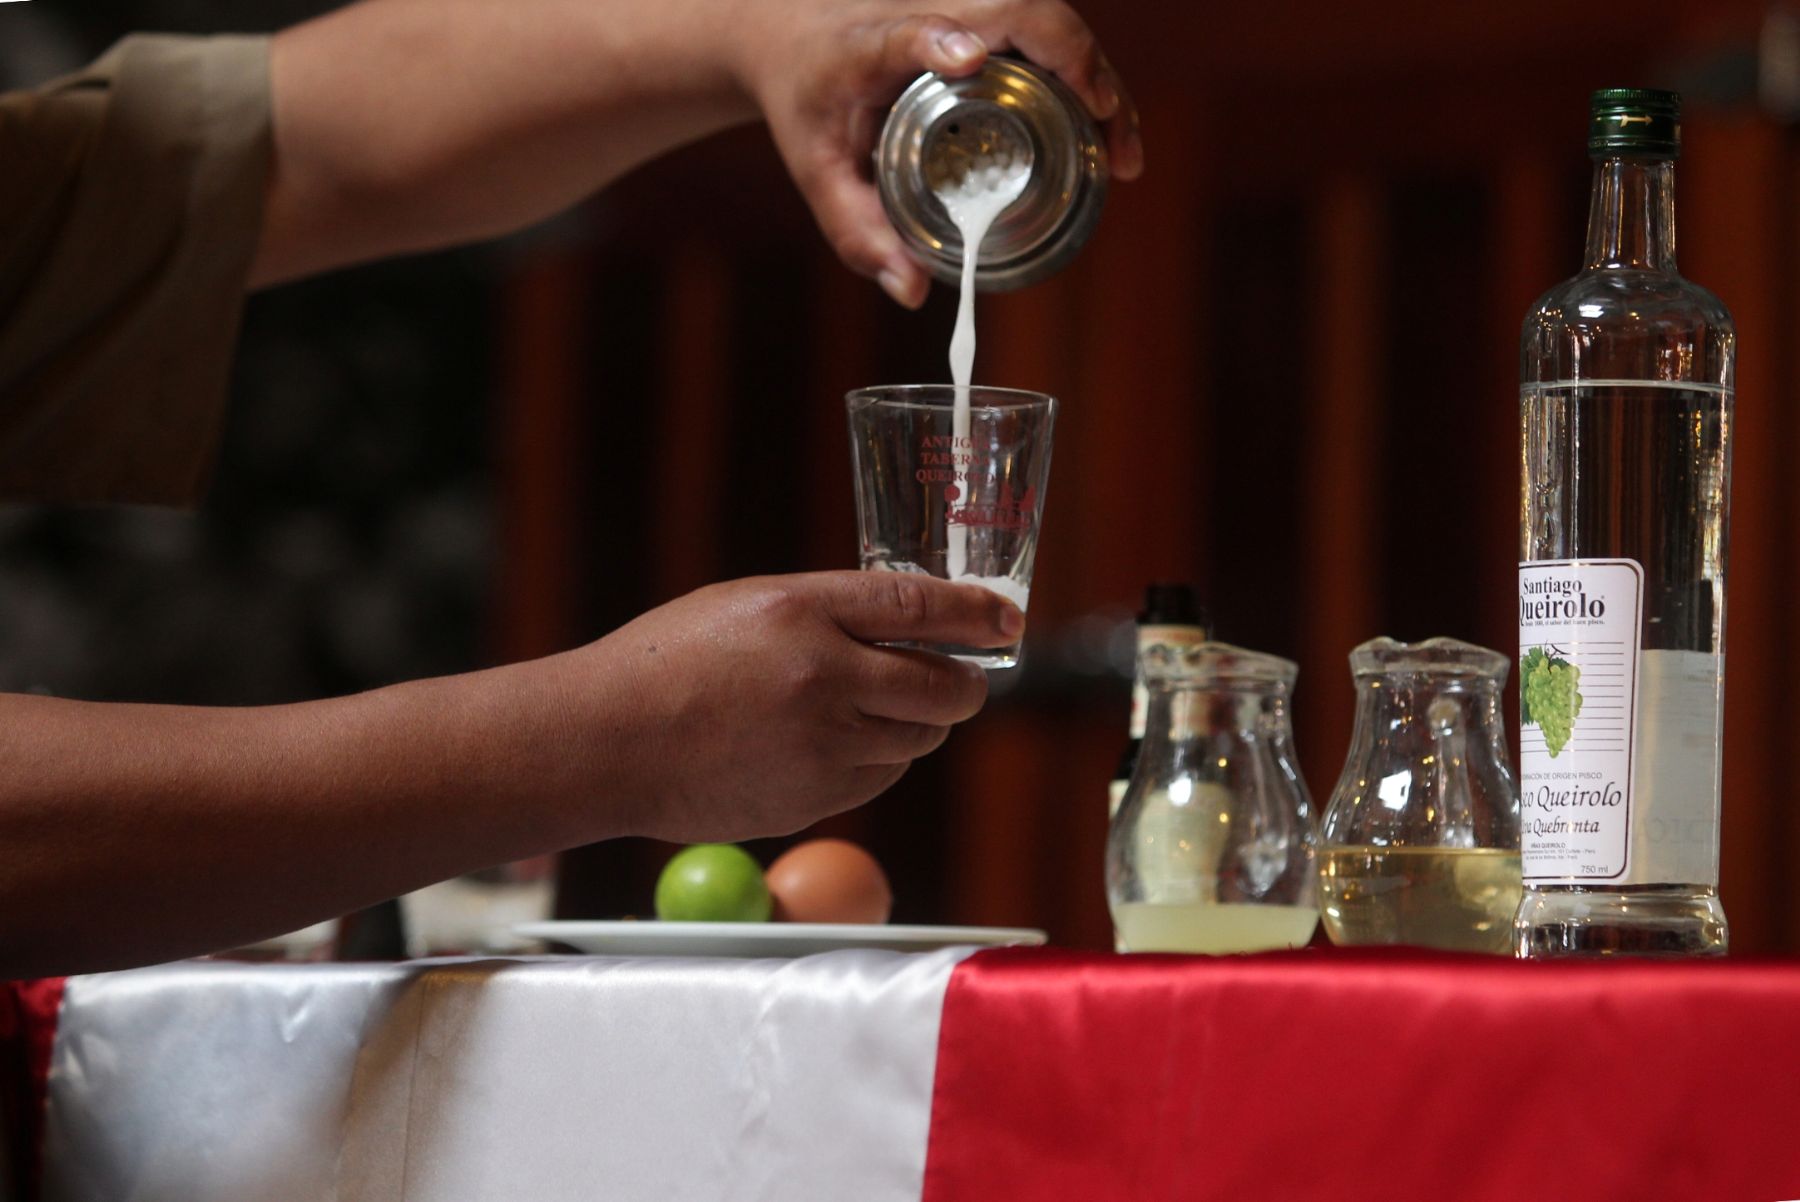 The first Saturday of every February is the official "Día del Pisco Sour" or Pisco Sour Day in Peru.